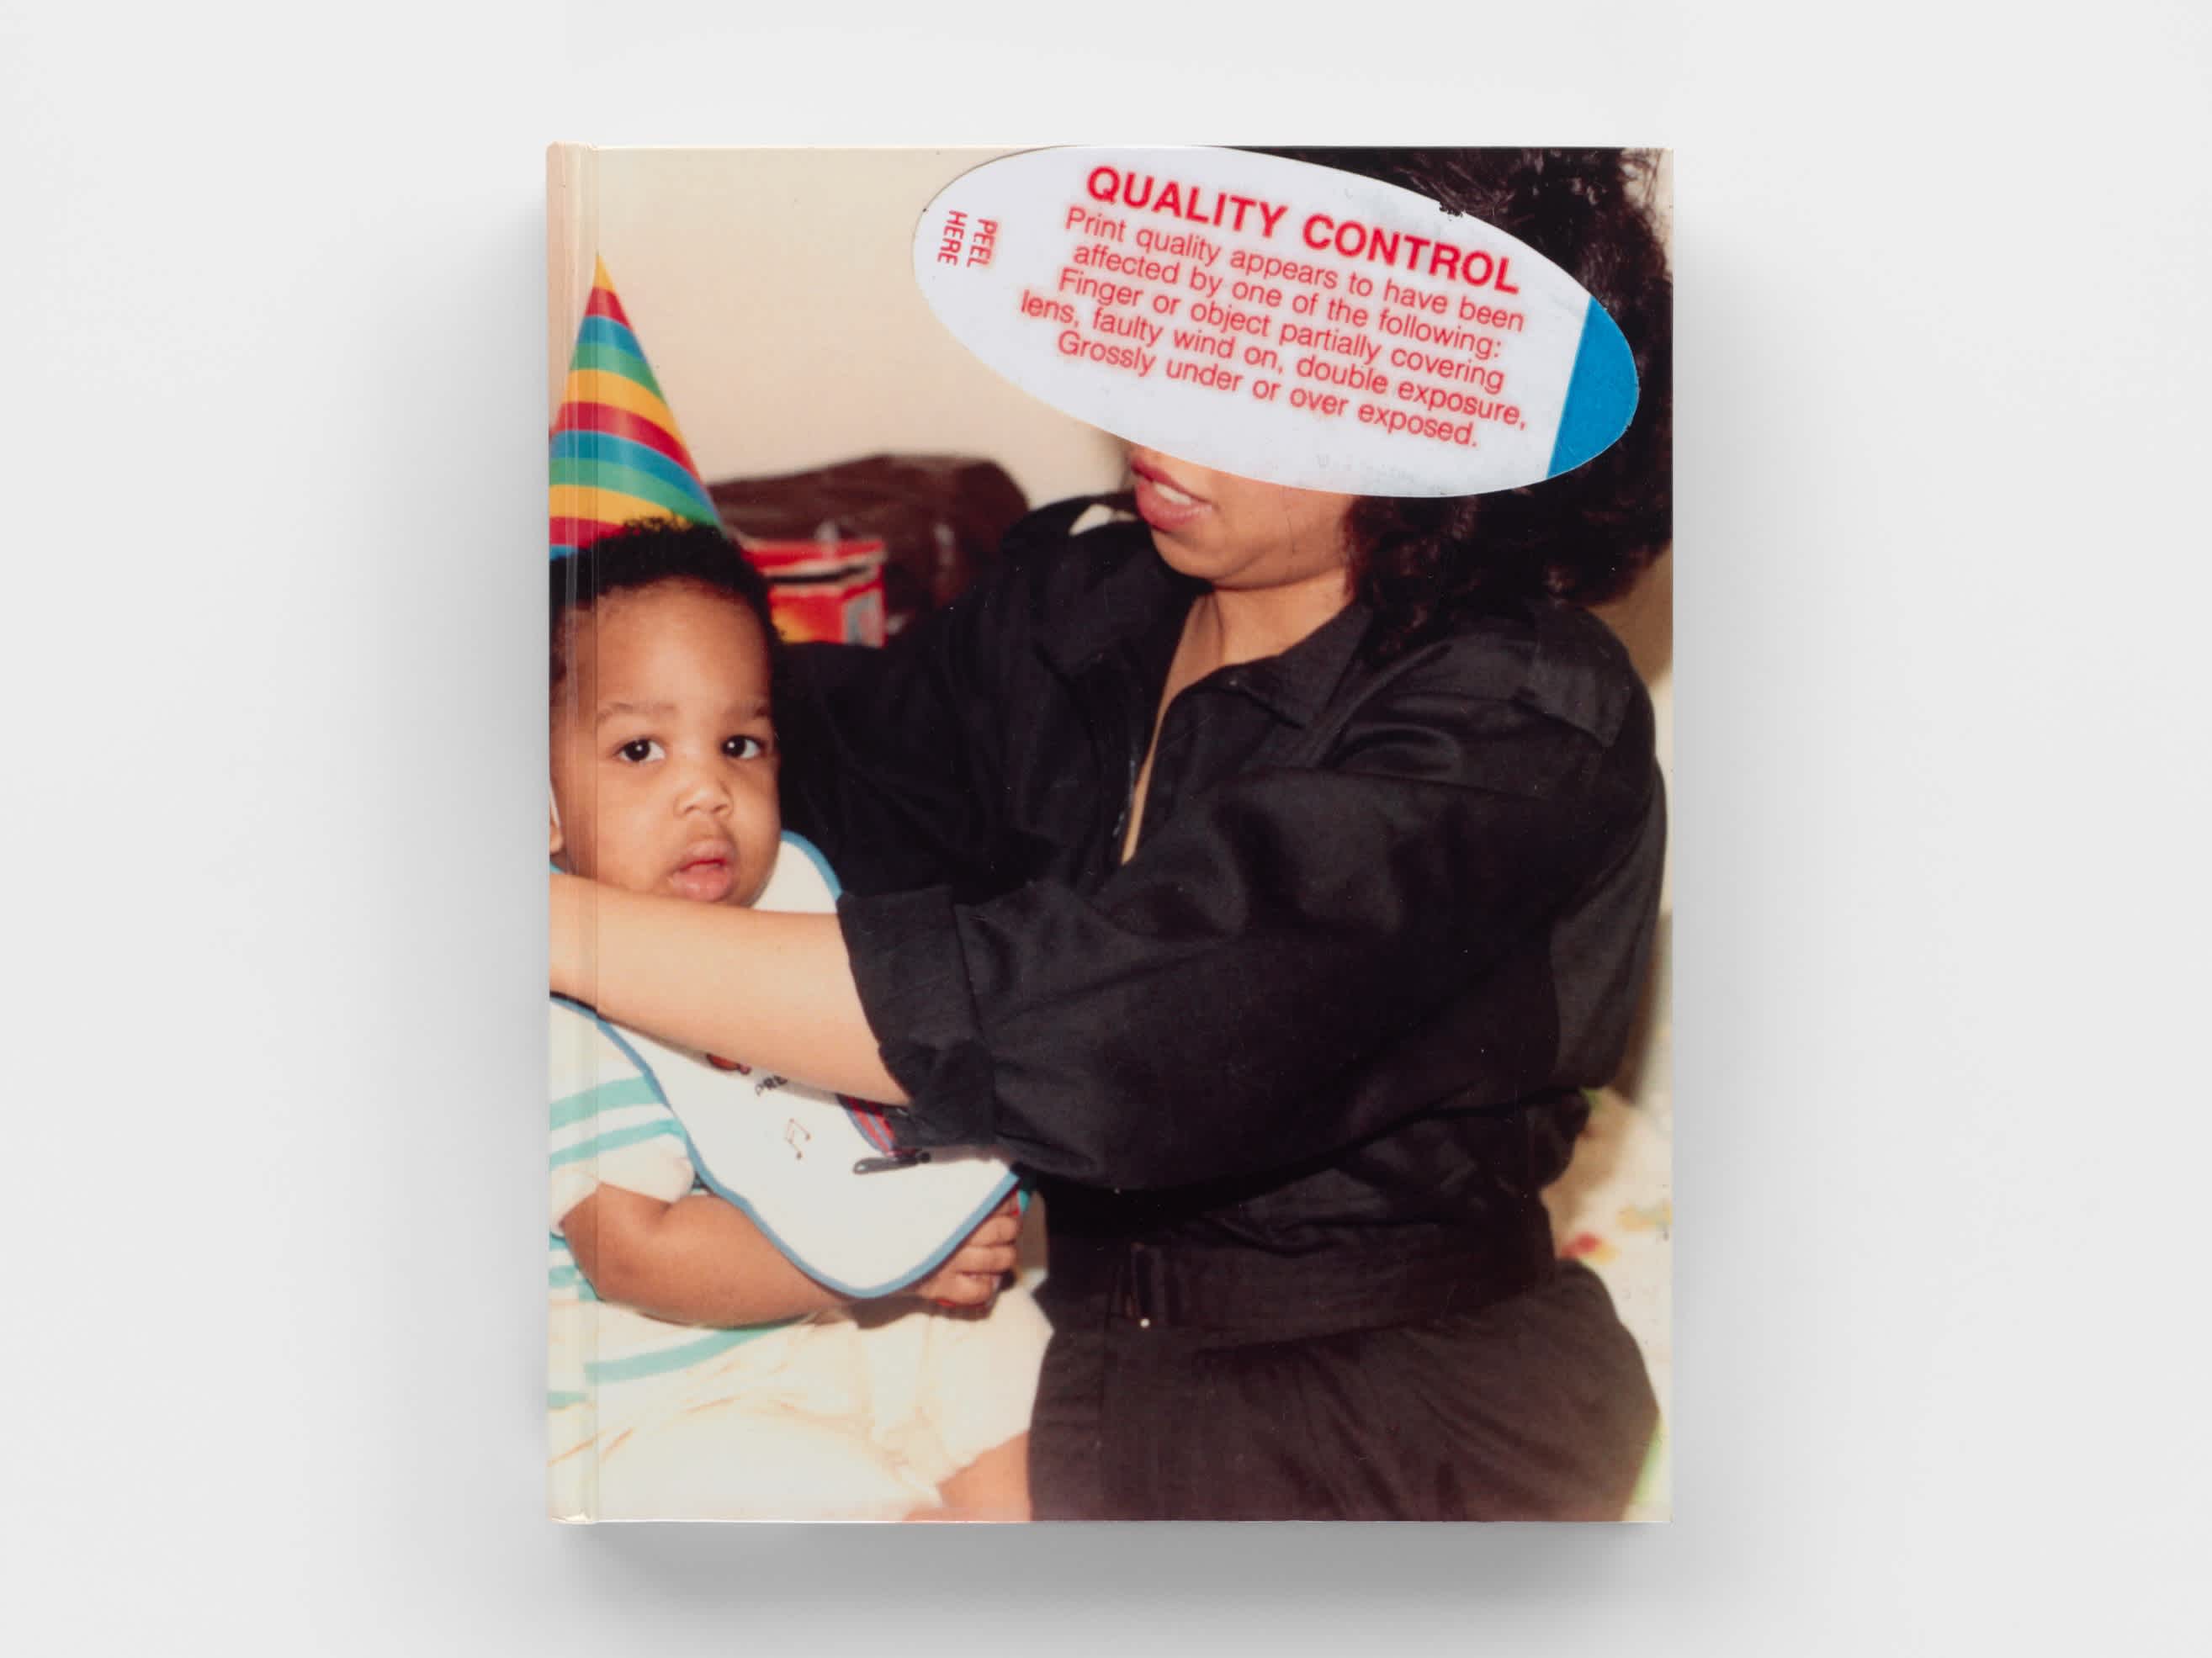 The front cover of a book floating on a gray background. The cover is an old home photo of a mother holding a baby. The baby wears a pointed birthday hat. The mother's face is obscured by a film processing quality check sticker which includes the title of the book, "Quality Control".